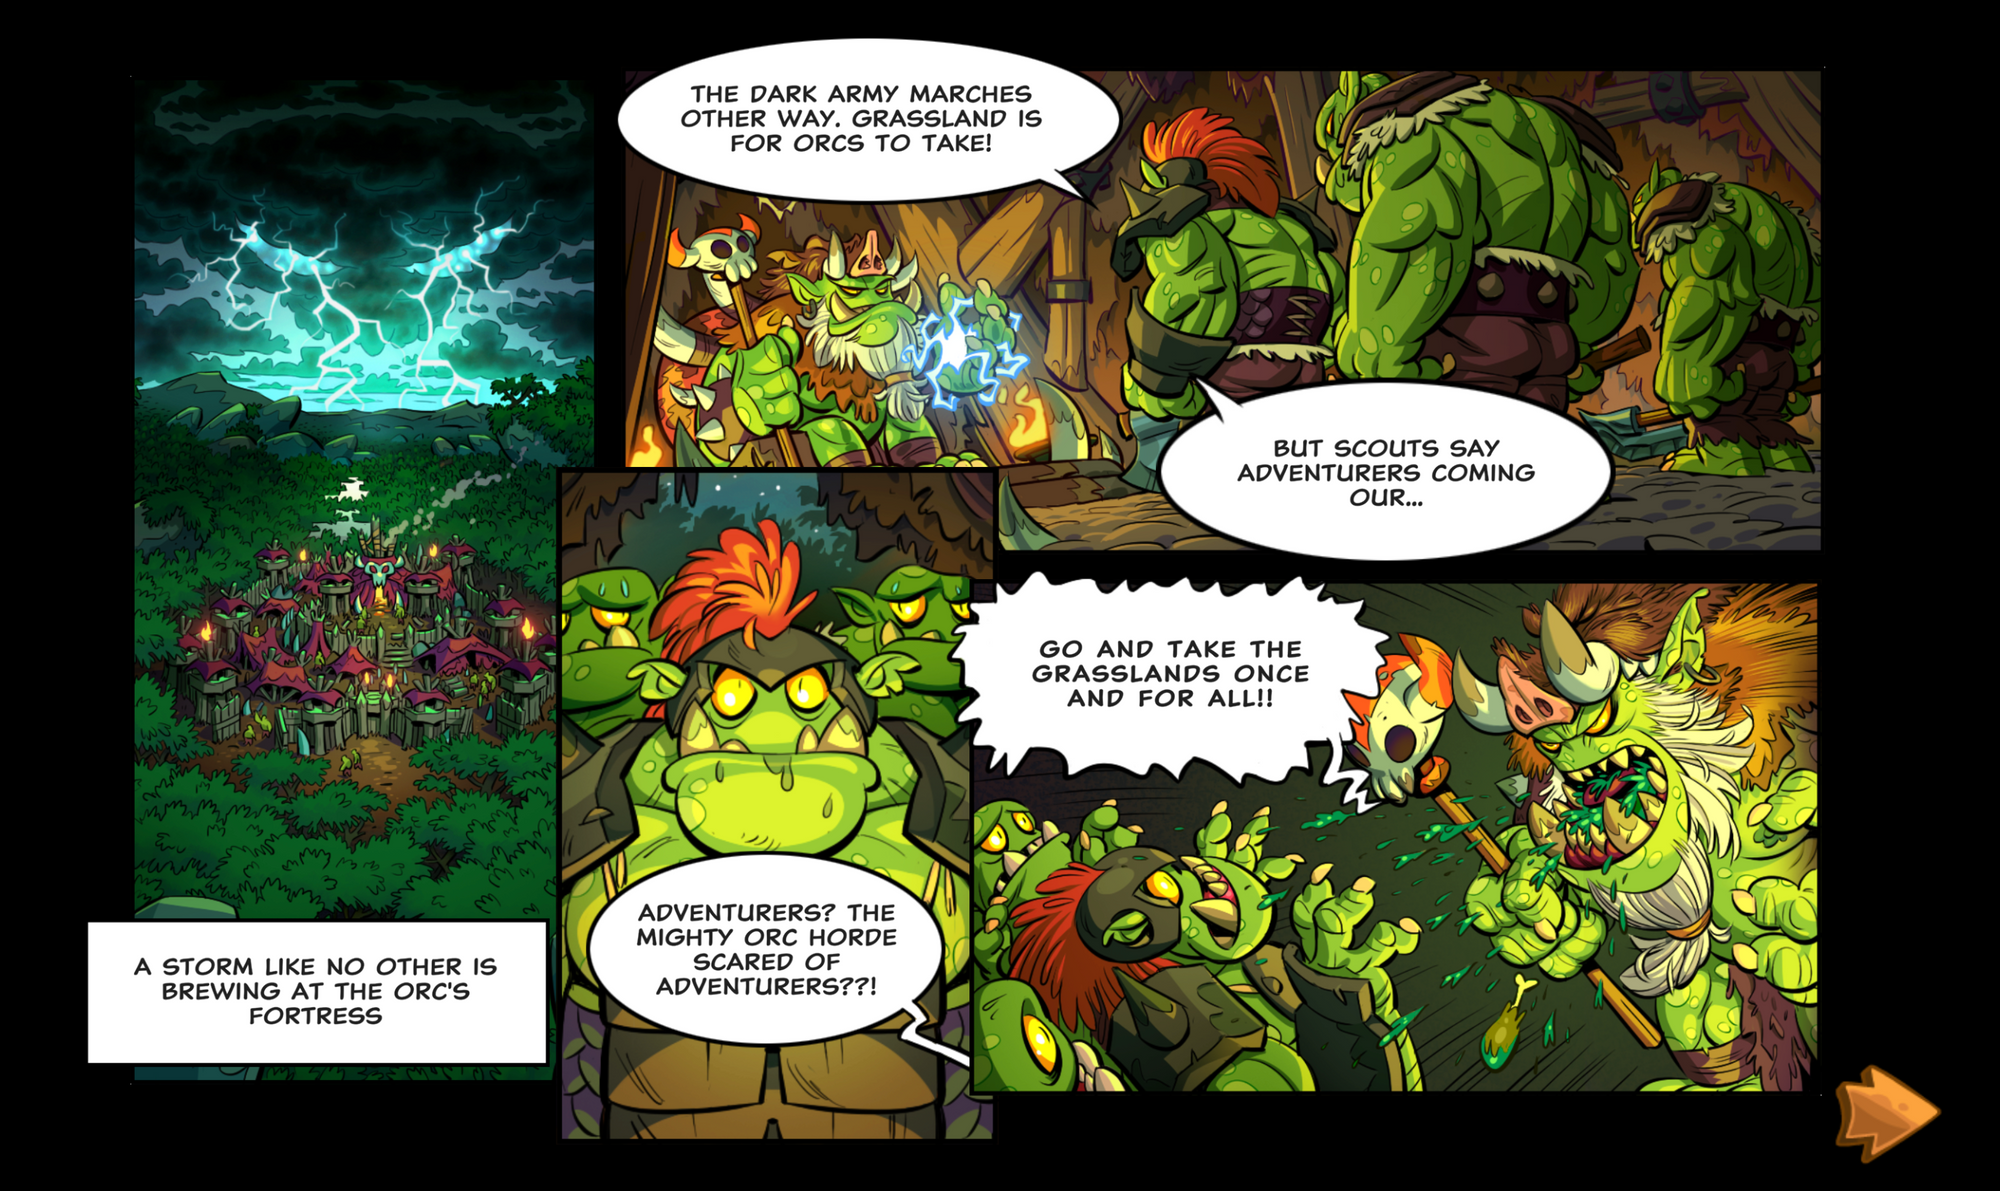 Cut scene comic panels from the game. A storm brews over an orc fortress, where scouts report back to the orc leader about adventurers on the trail.